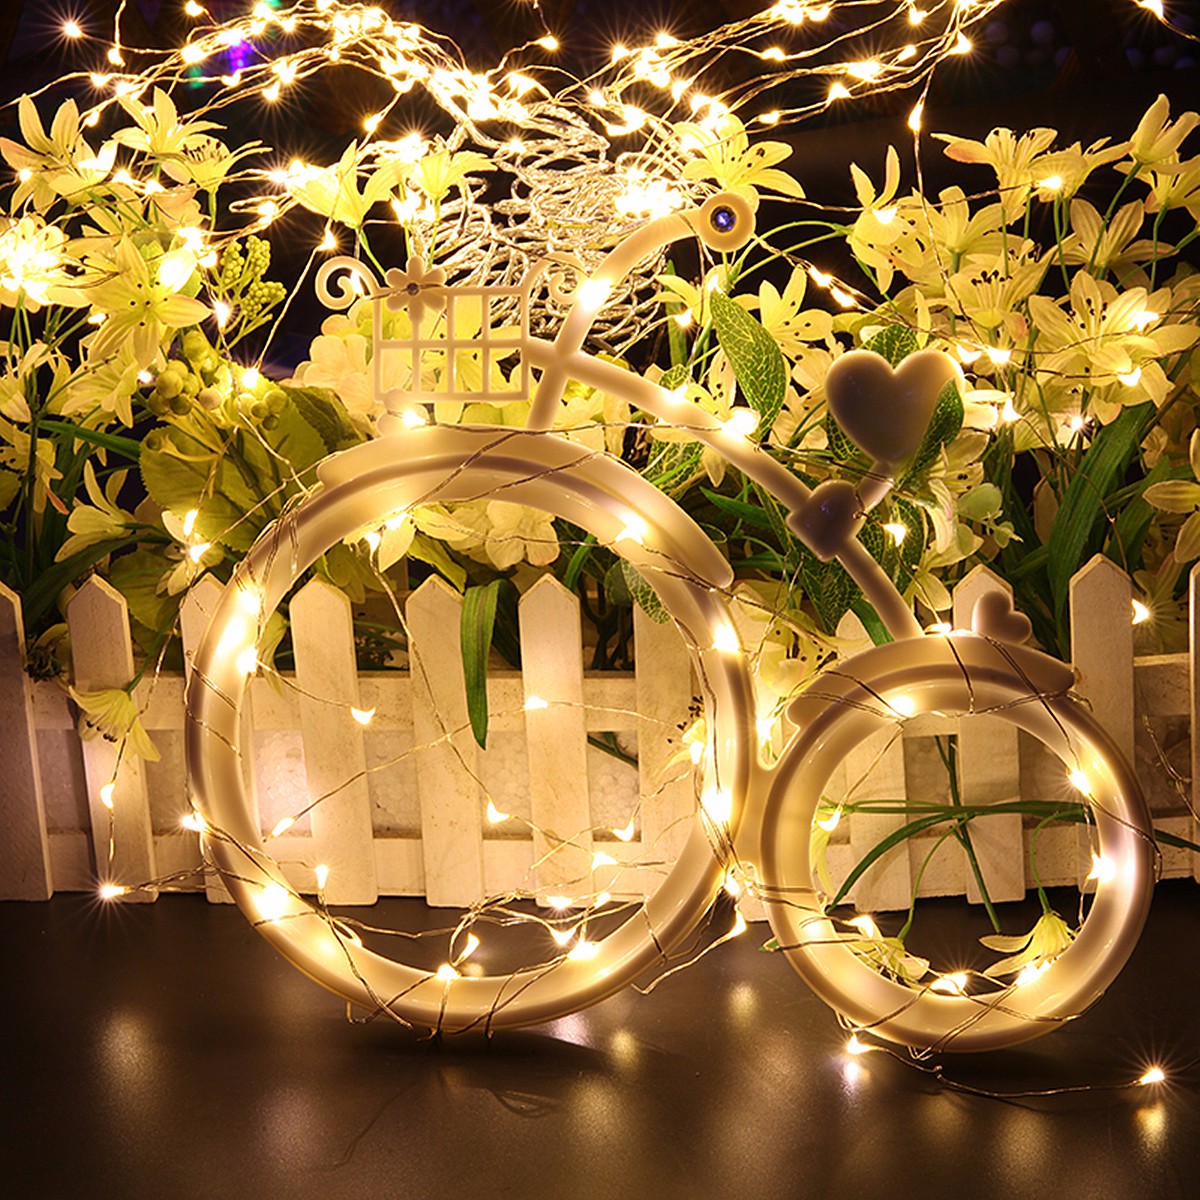 10M-100LED-Solar-Powered-Copper-Wire-Fairy-String-Light-for-Halloween-Christmas-Party-Home-Decor-1343876